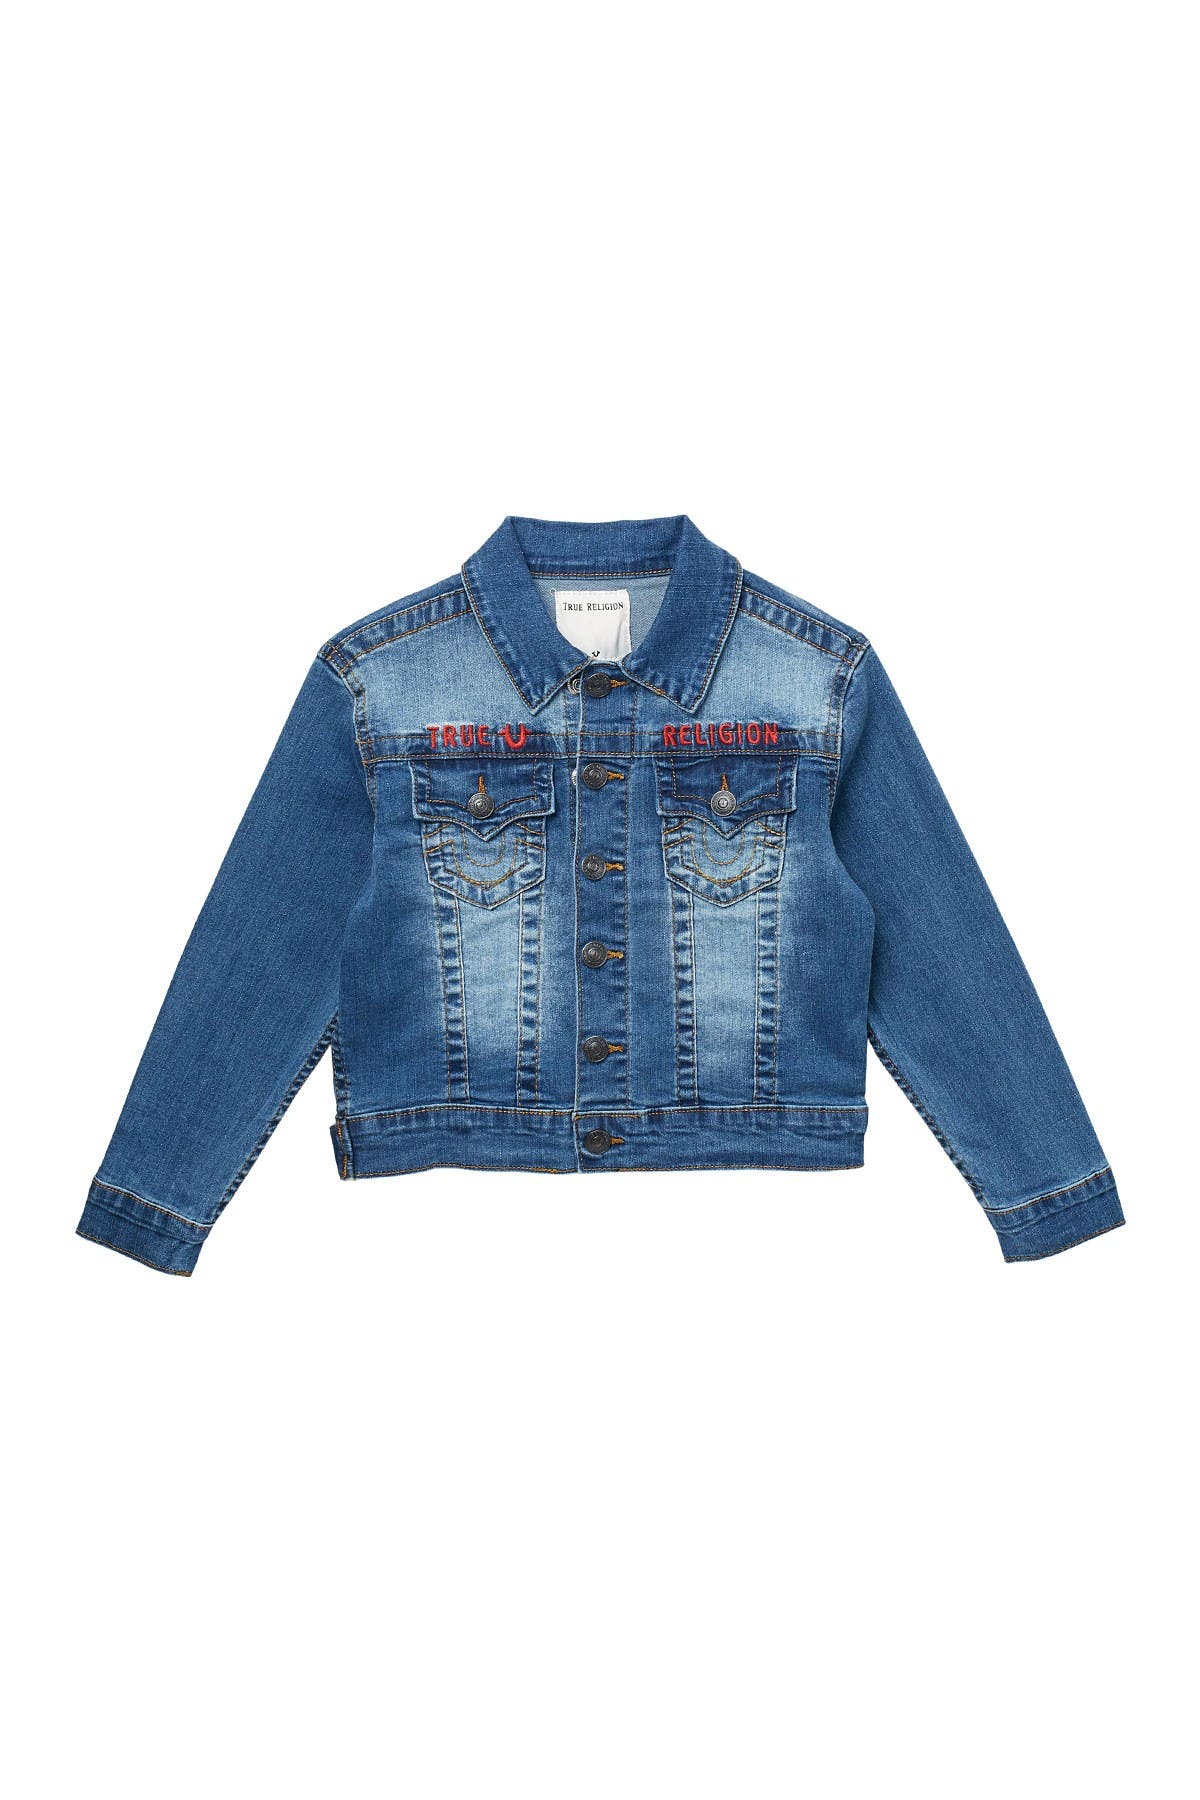 true religion coats for toddlers